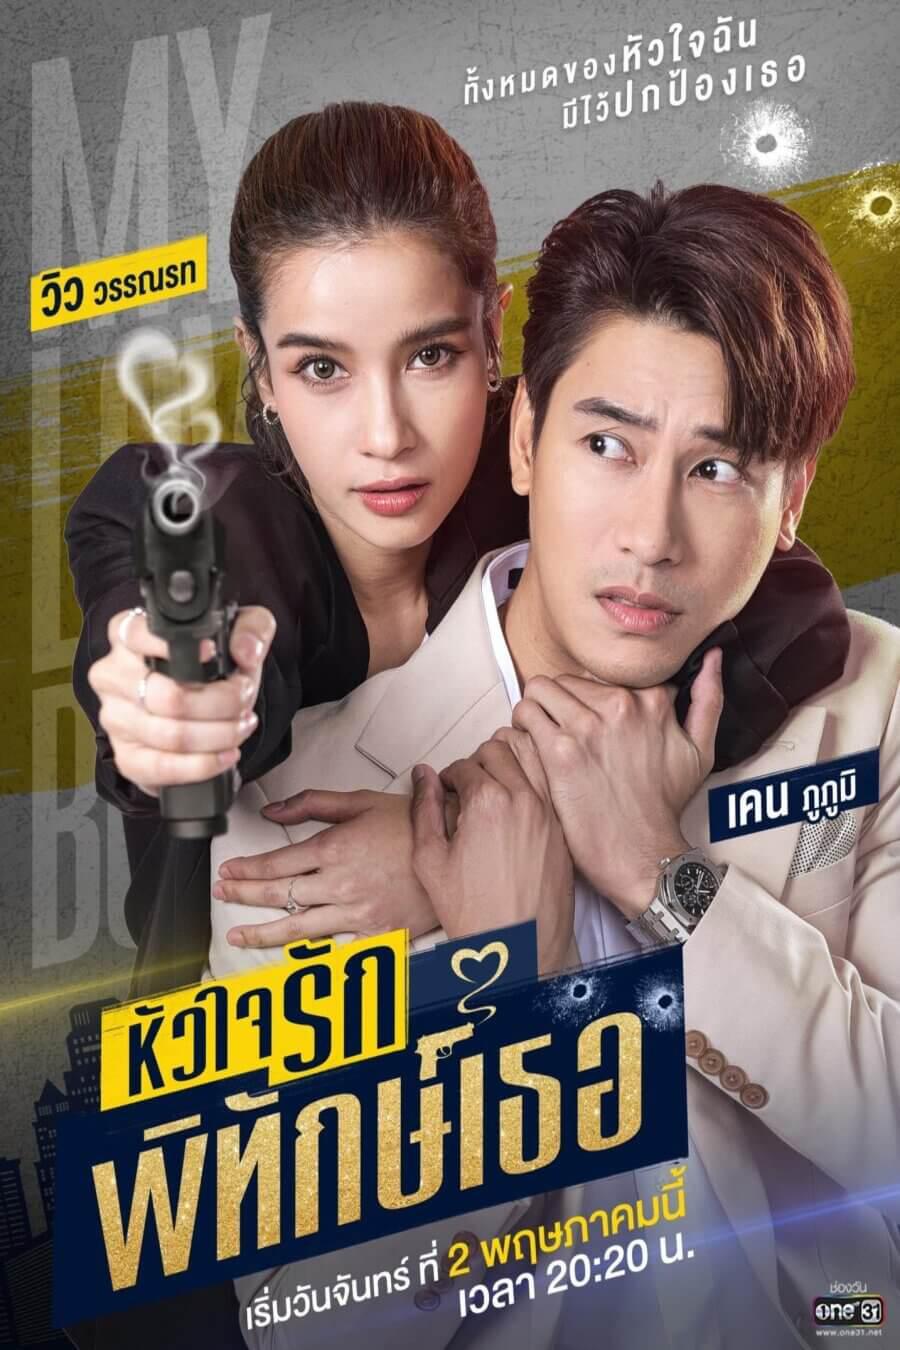 TV ratings for My Lovely Bodyguard (หัวใจรักพิทักษ์เธอ) in India. GMM One TV series